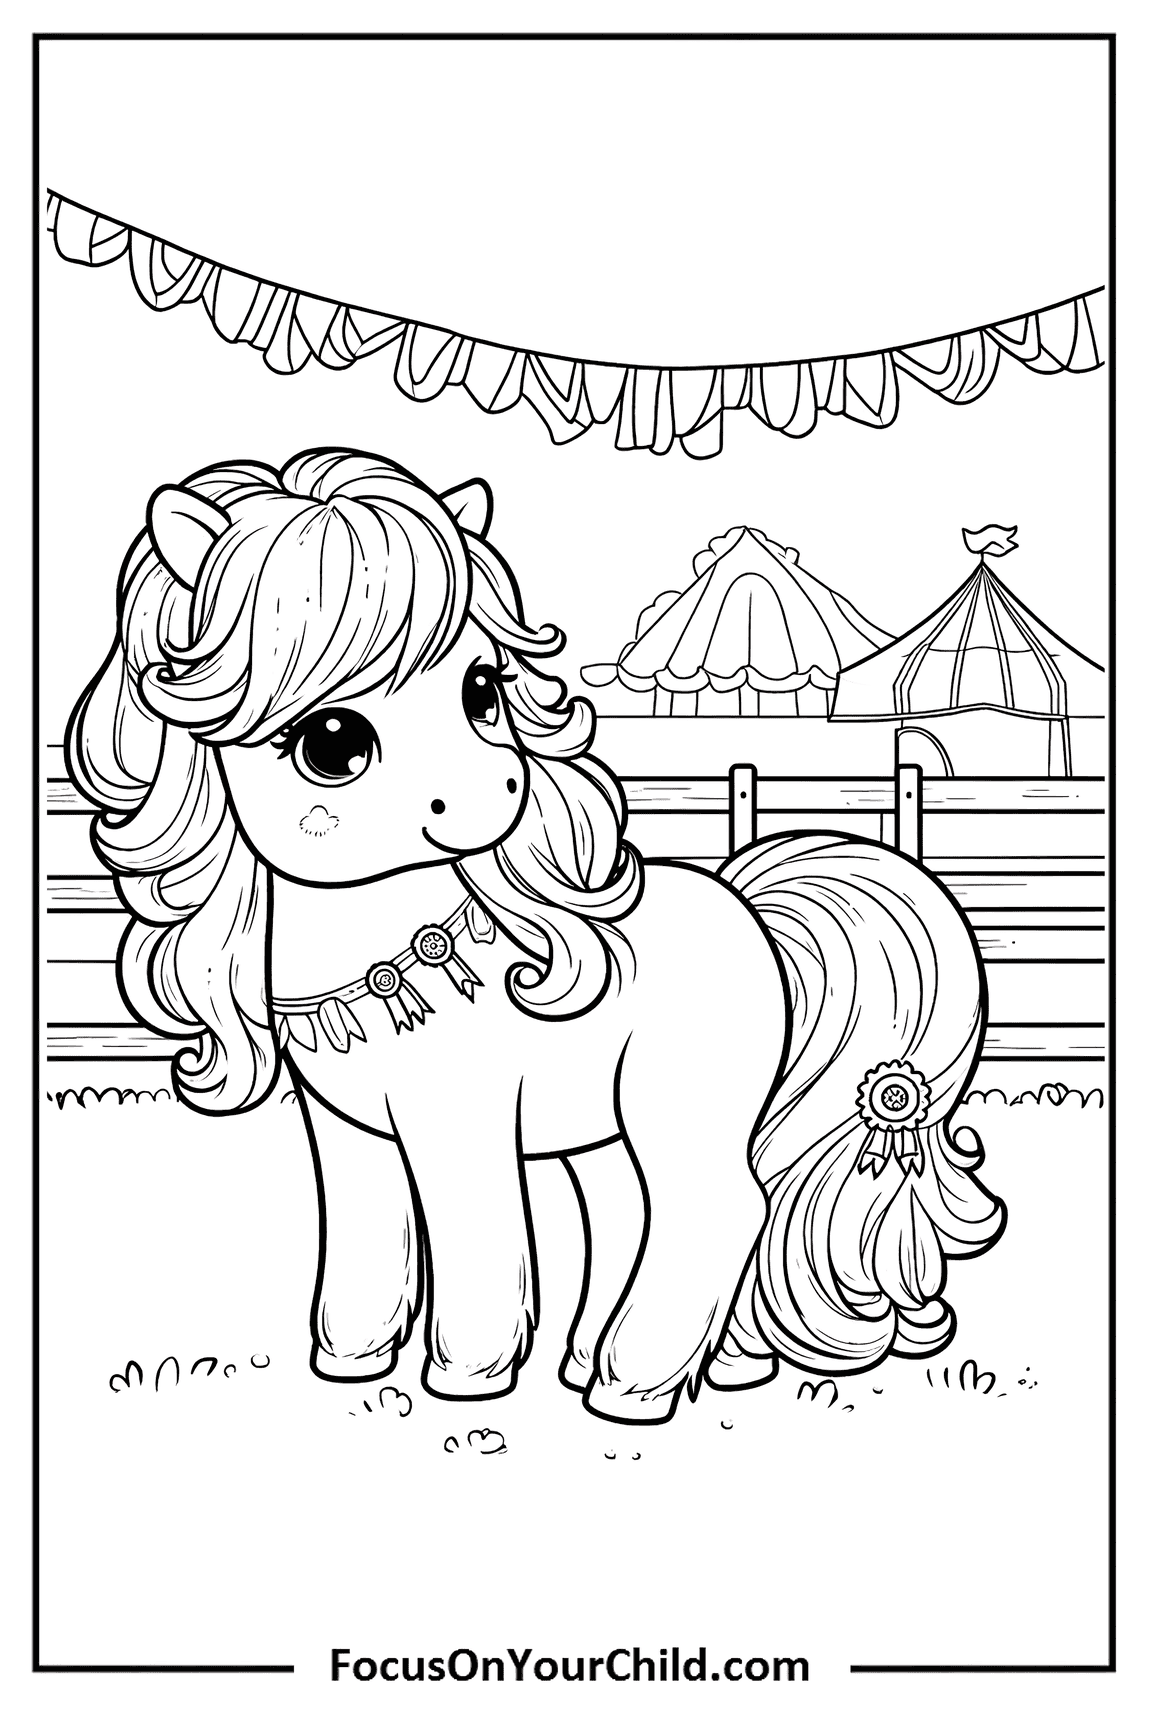 Charming pony standing in a festive farm setting with tents and decorations.